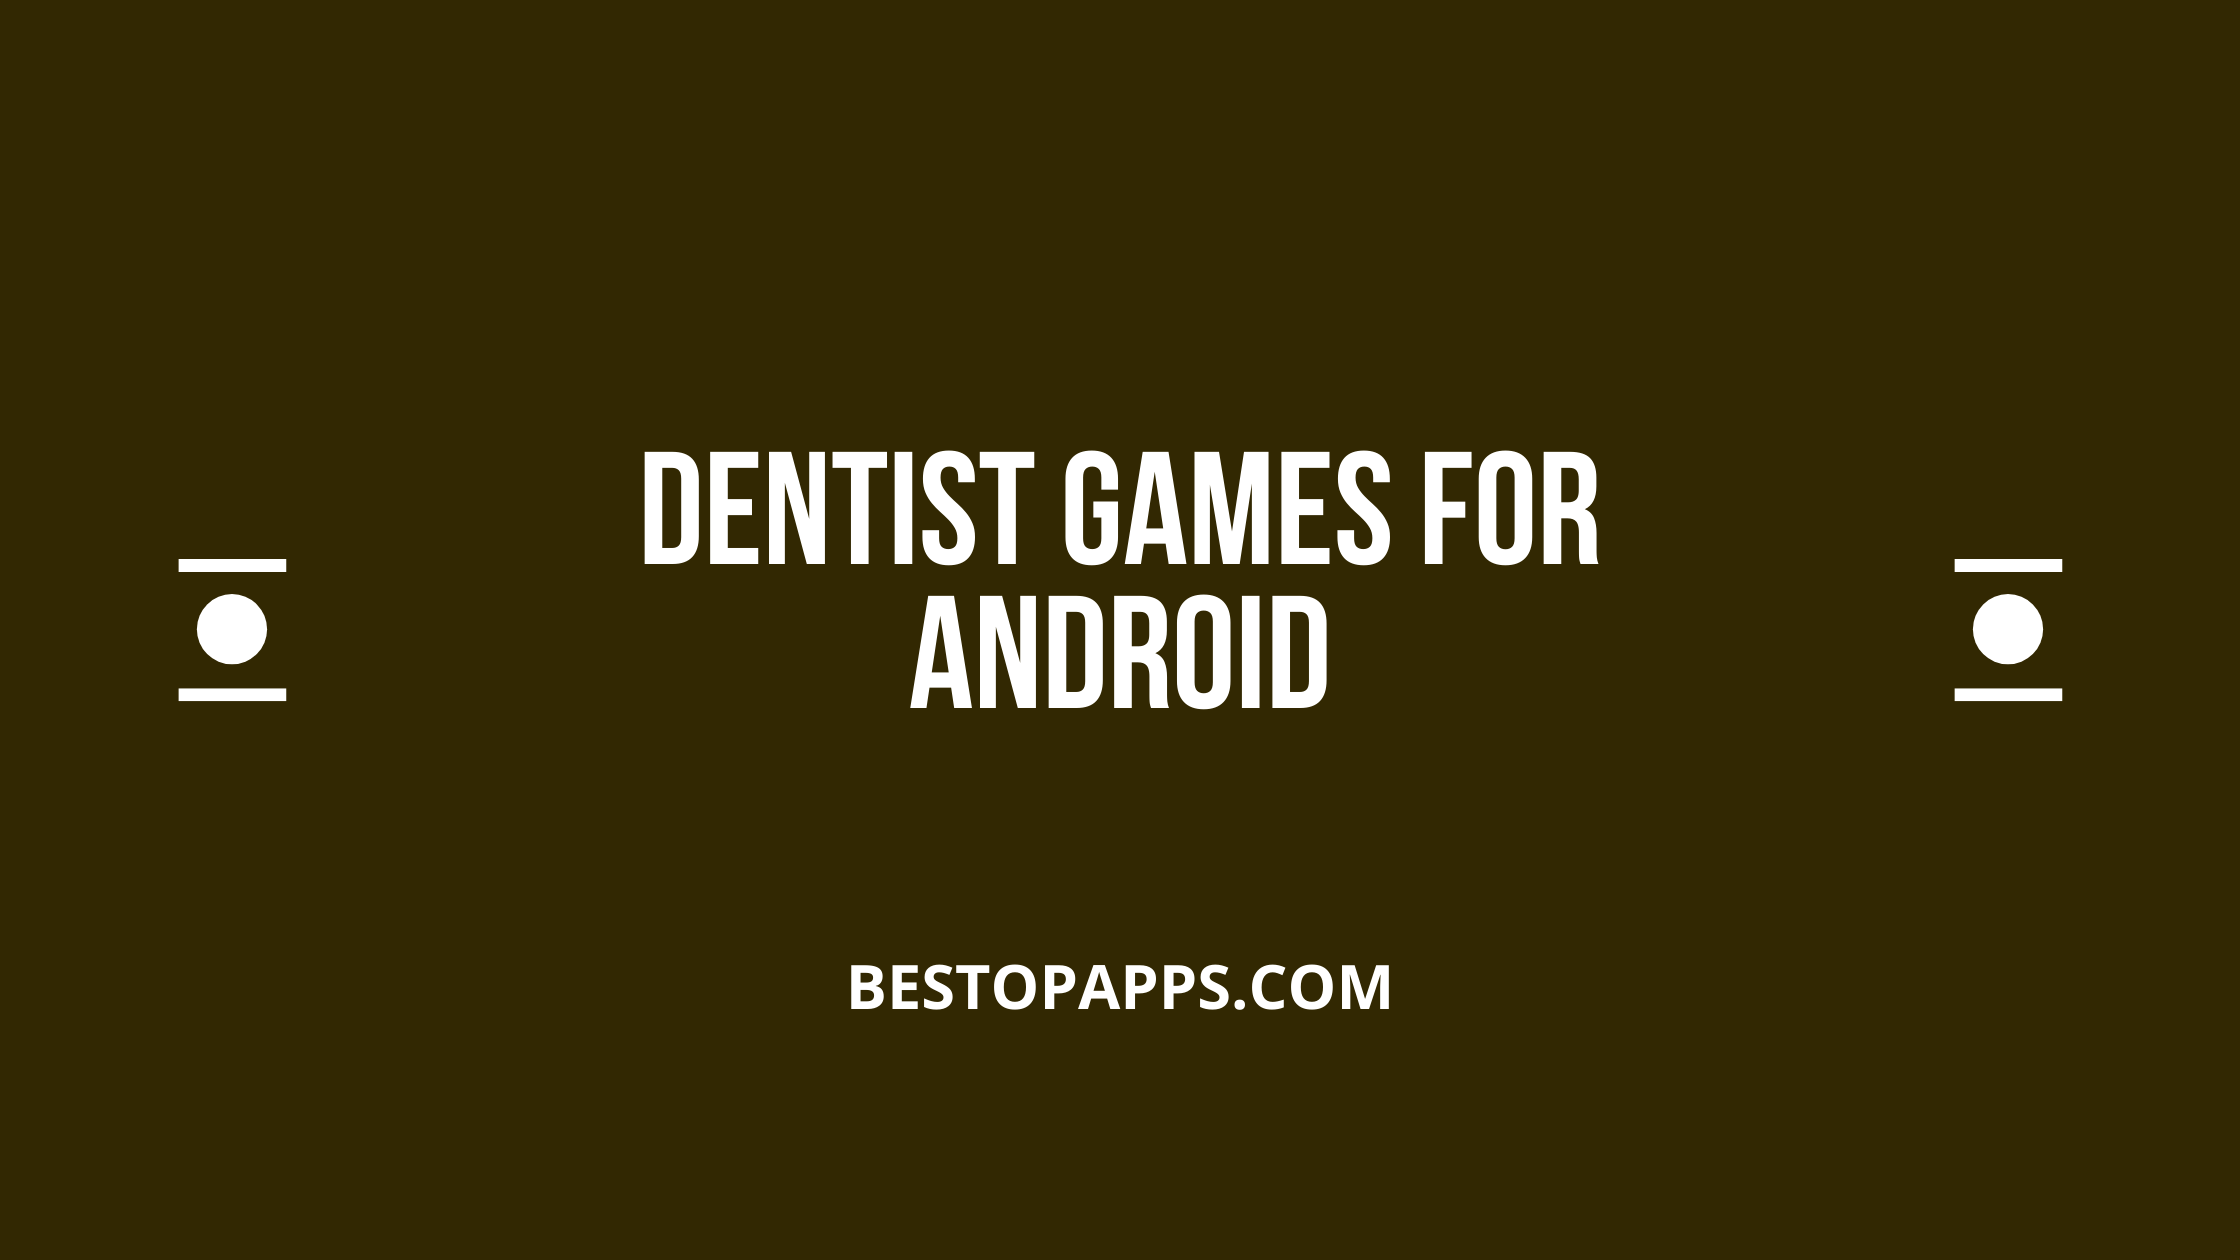 Dentist Games for Android